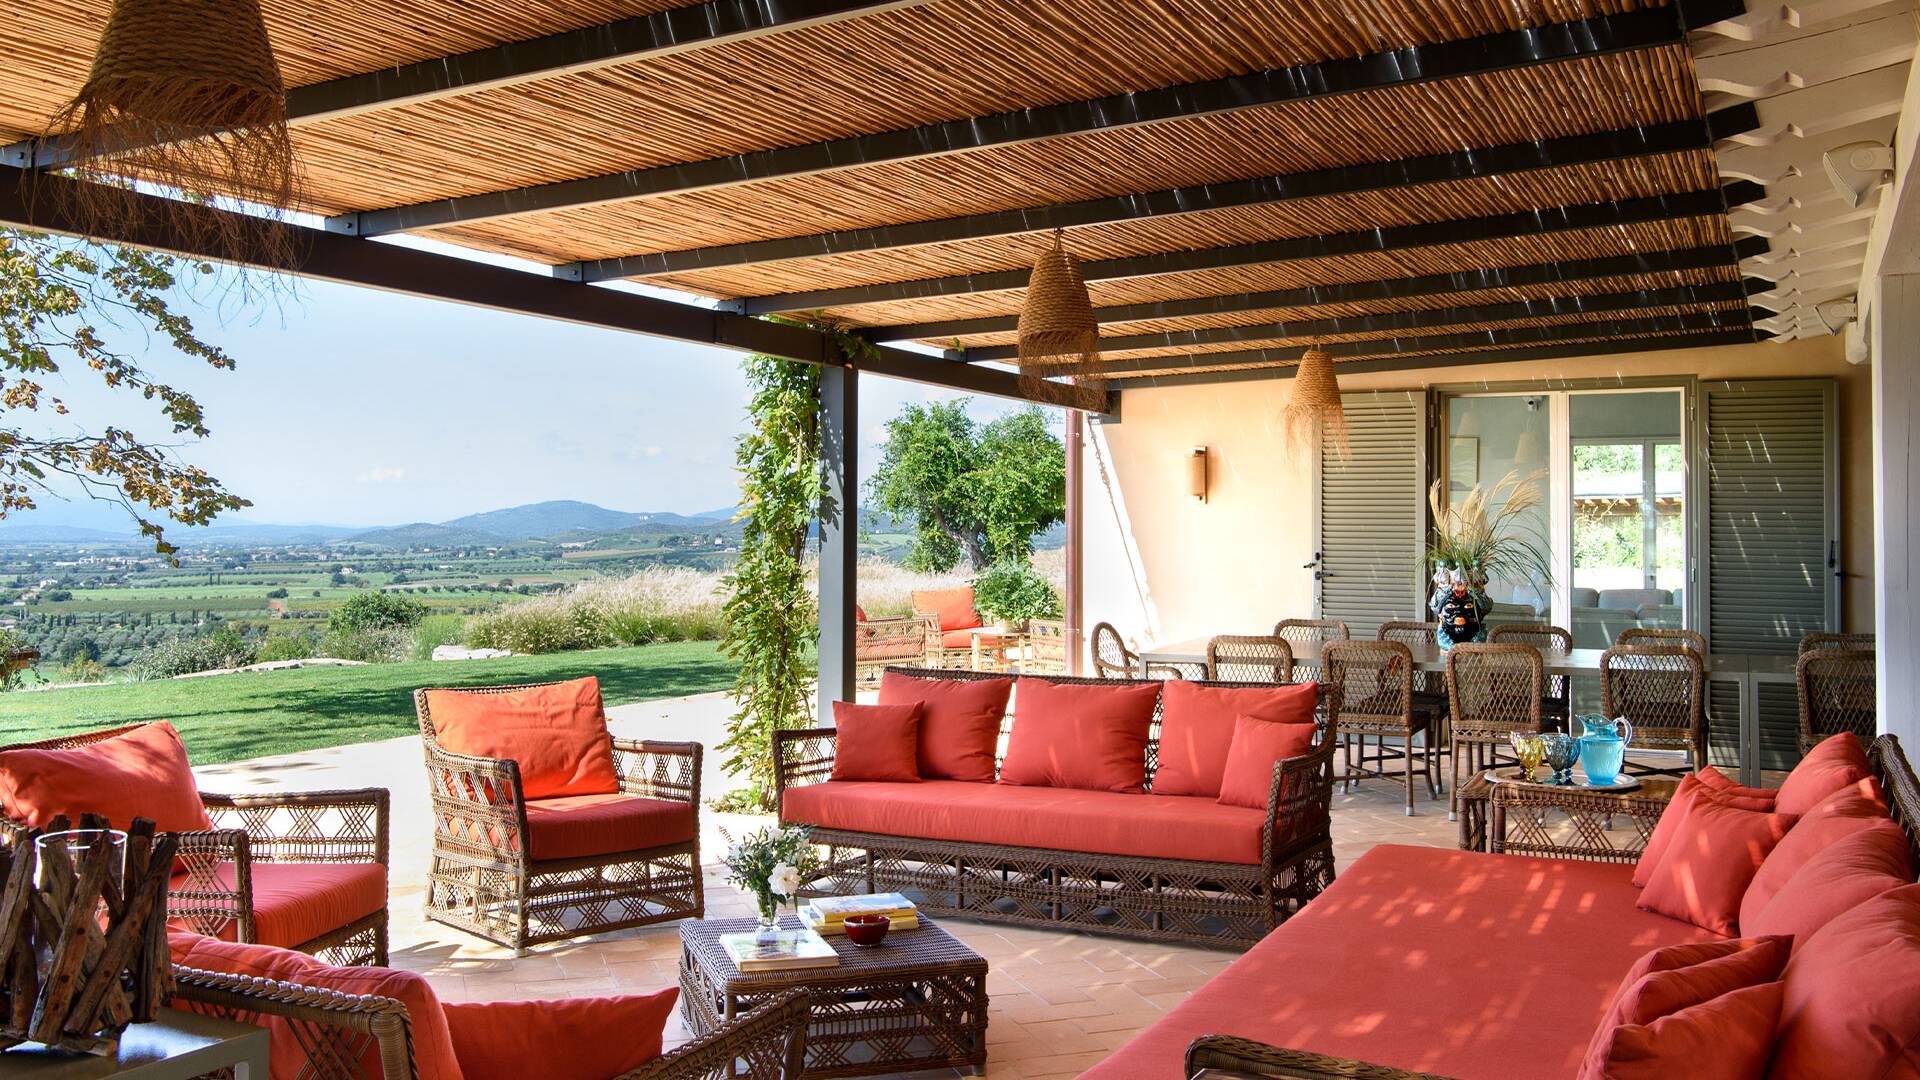 fully-equipped and comfortable pergola